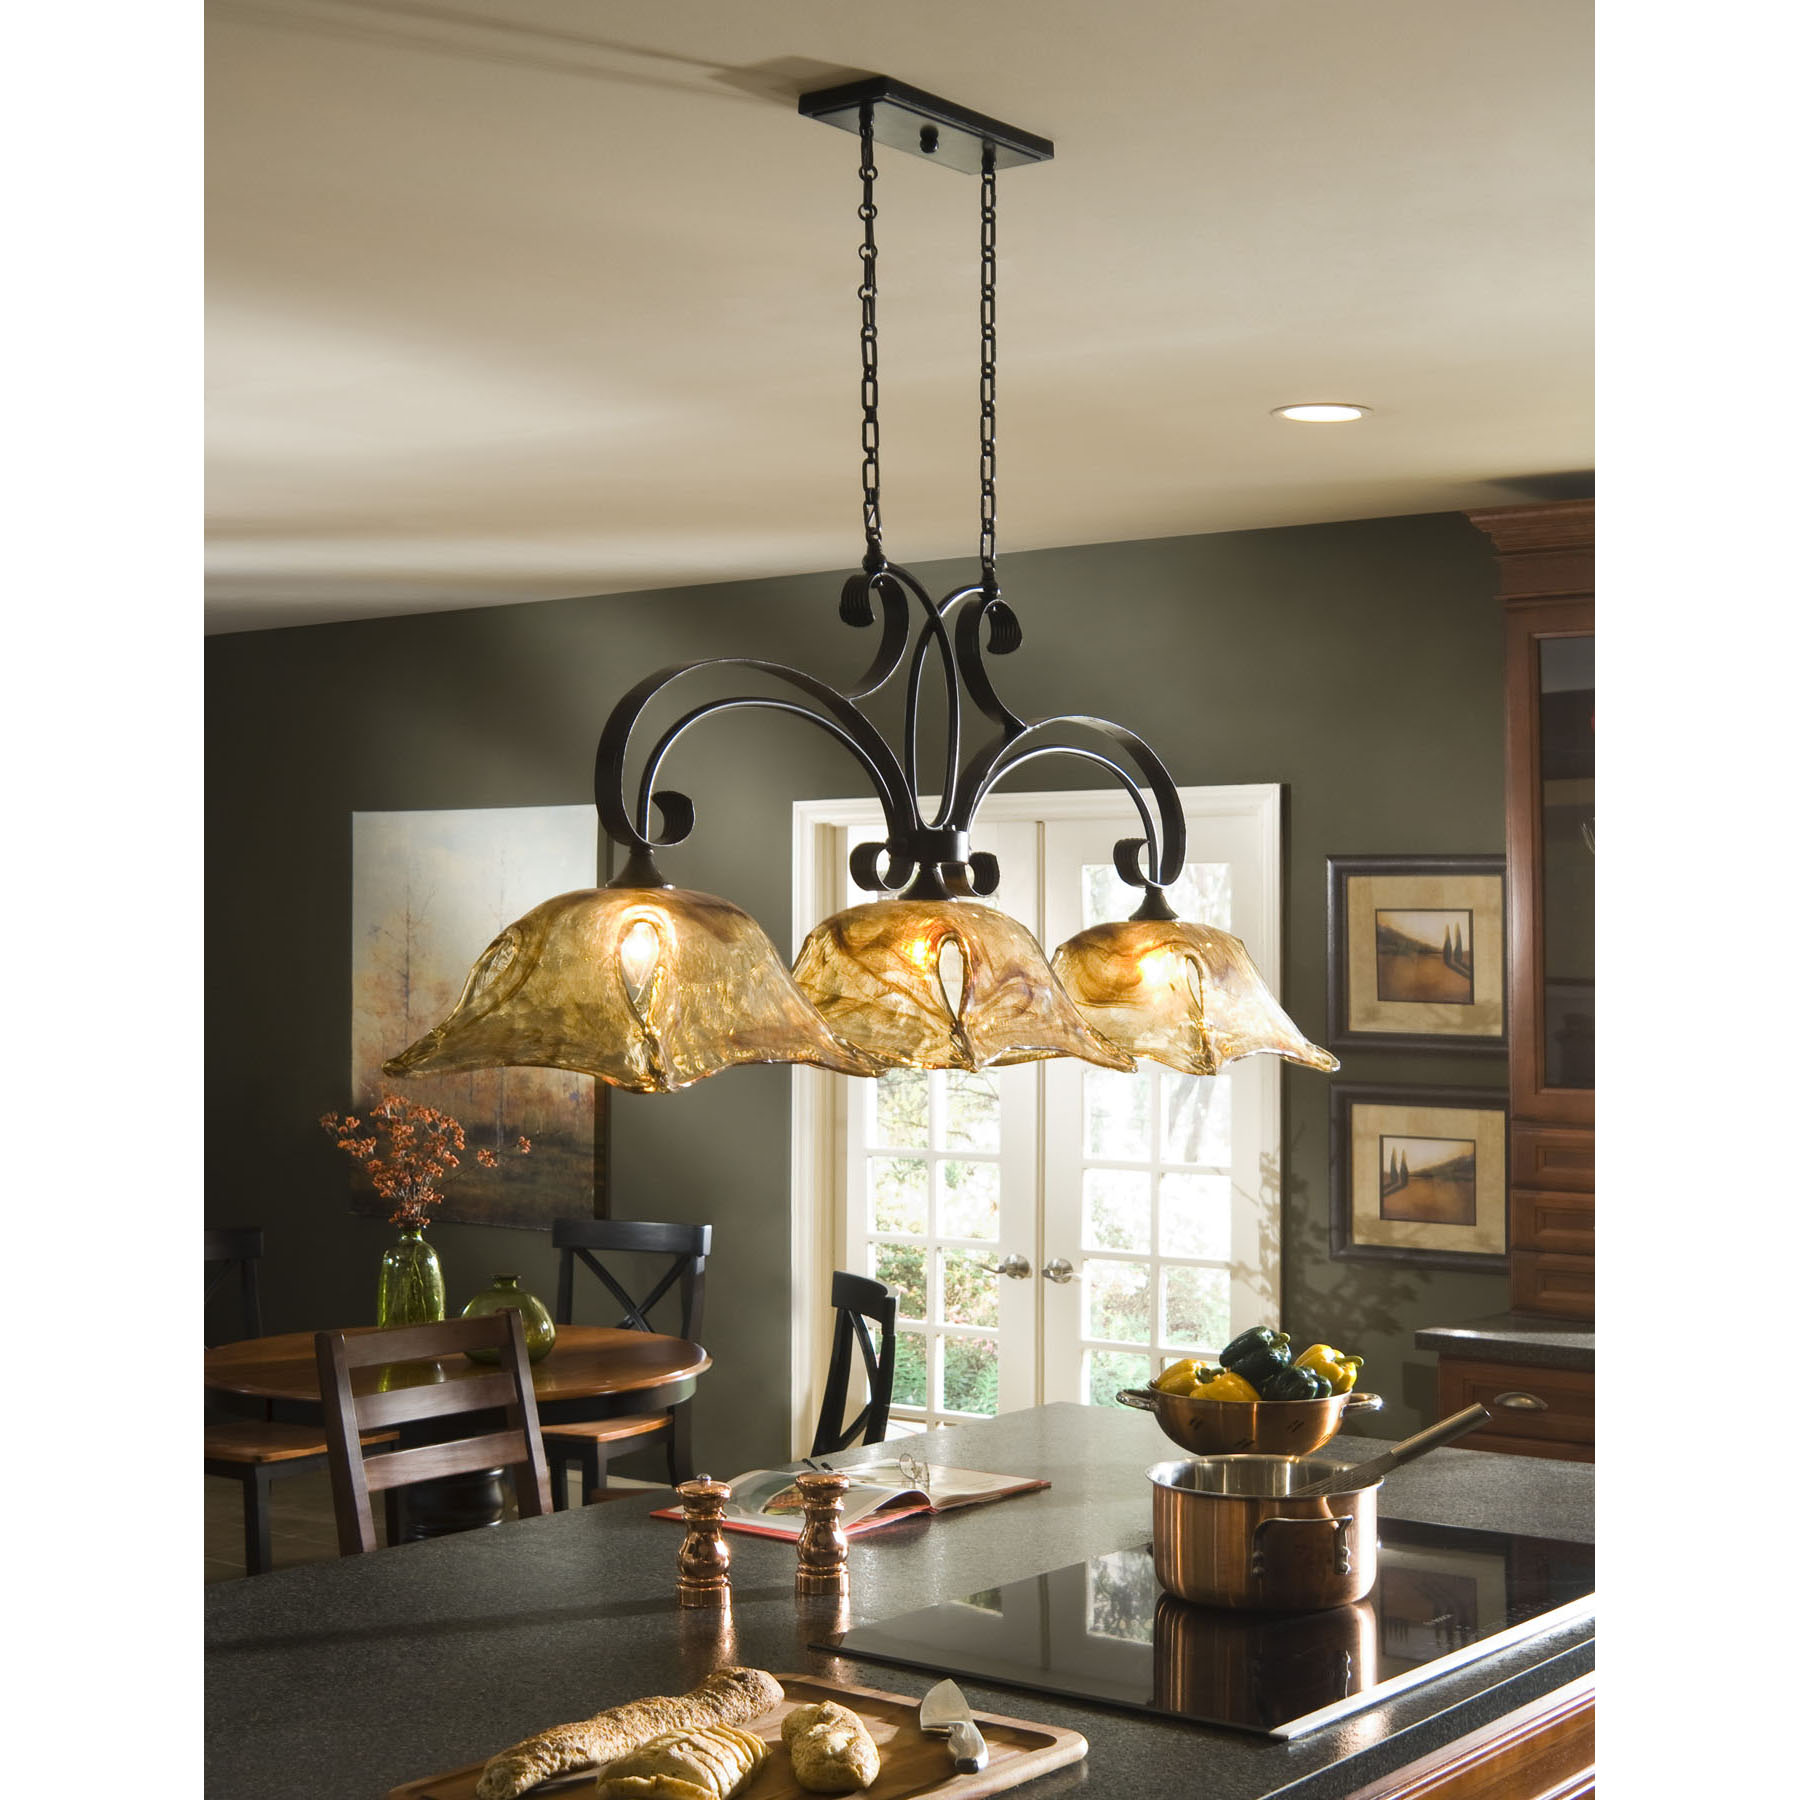 Branched Lamp Island Topnotch Branched Lamp In Kitchen Island Lighting Design With Steel Holder For Your Kitchen Set Kitchen Kitchen Island Lighting System With Pendant And Chandelier